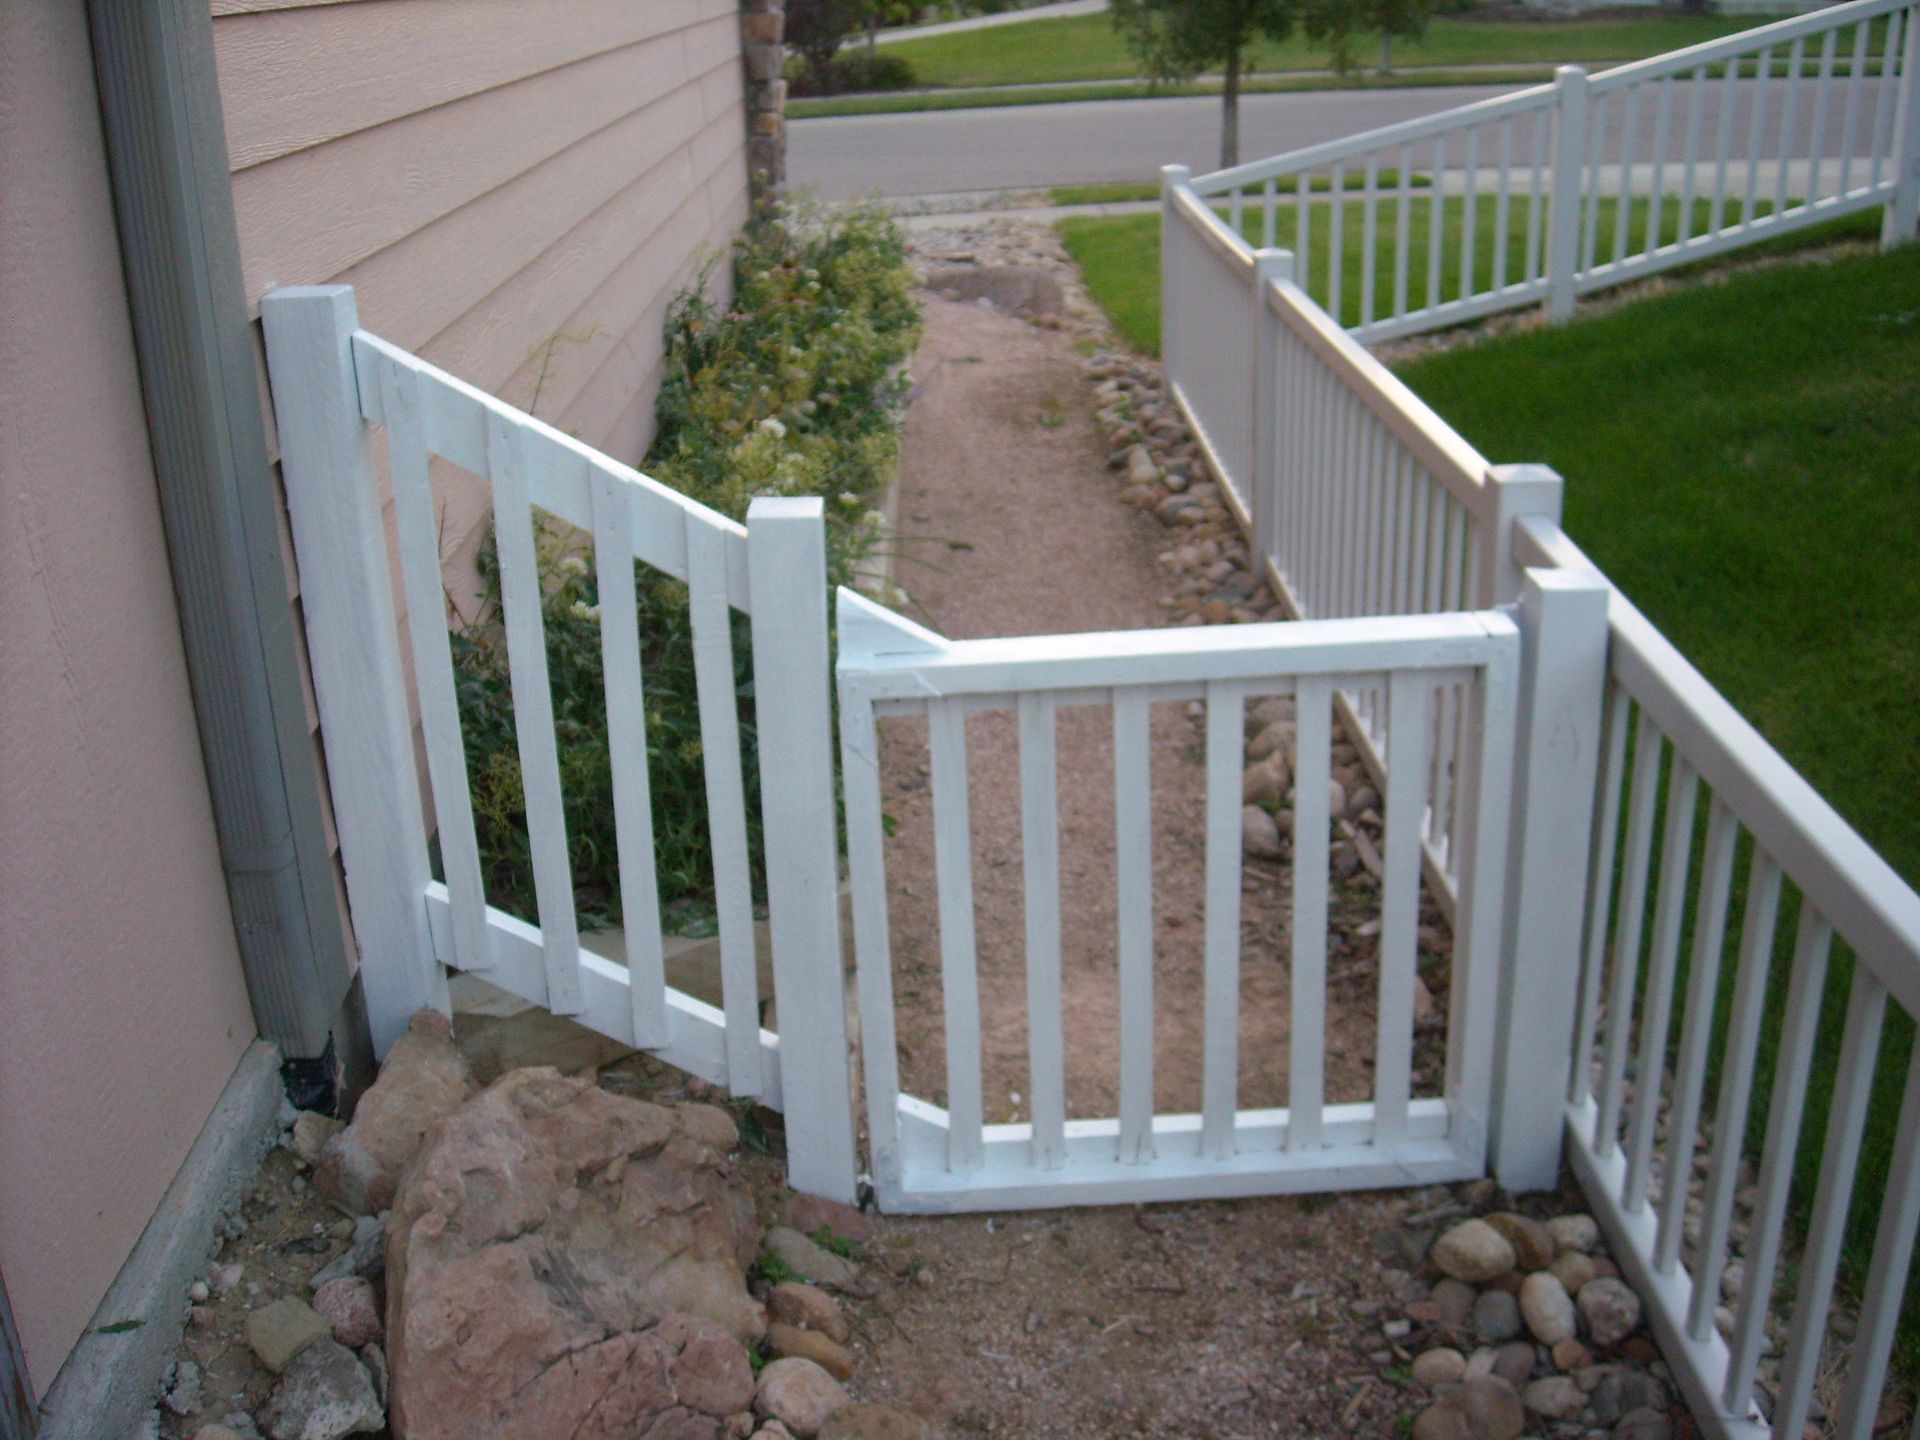 Small gate to extend the vinyl fencing on the side